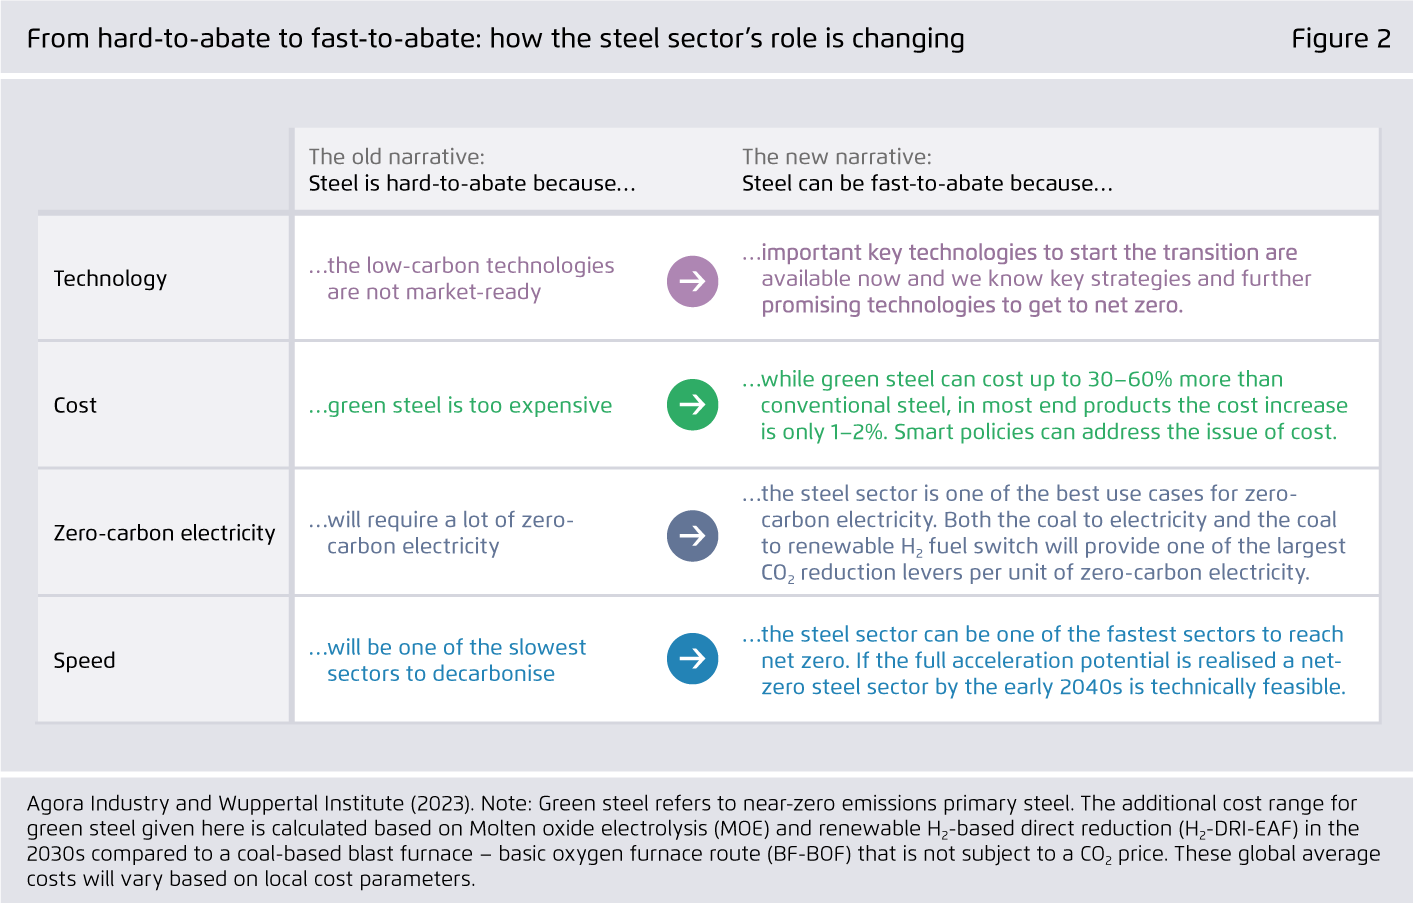 Preview for From hard-to-abate to fast-to-abate: how the steel sector’s role is changing